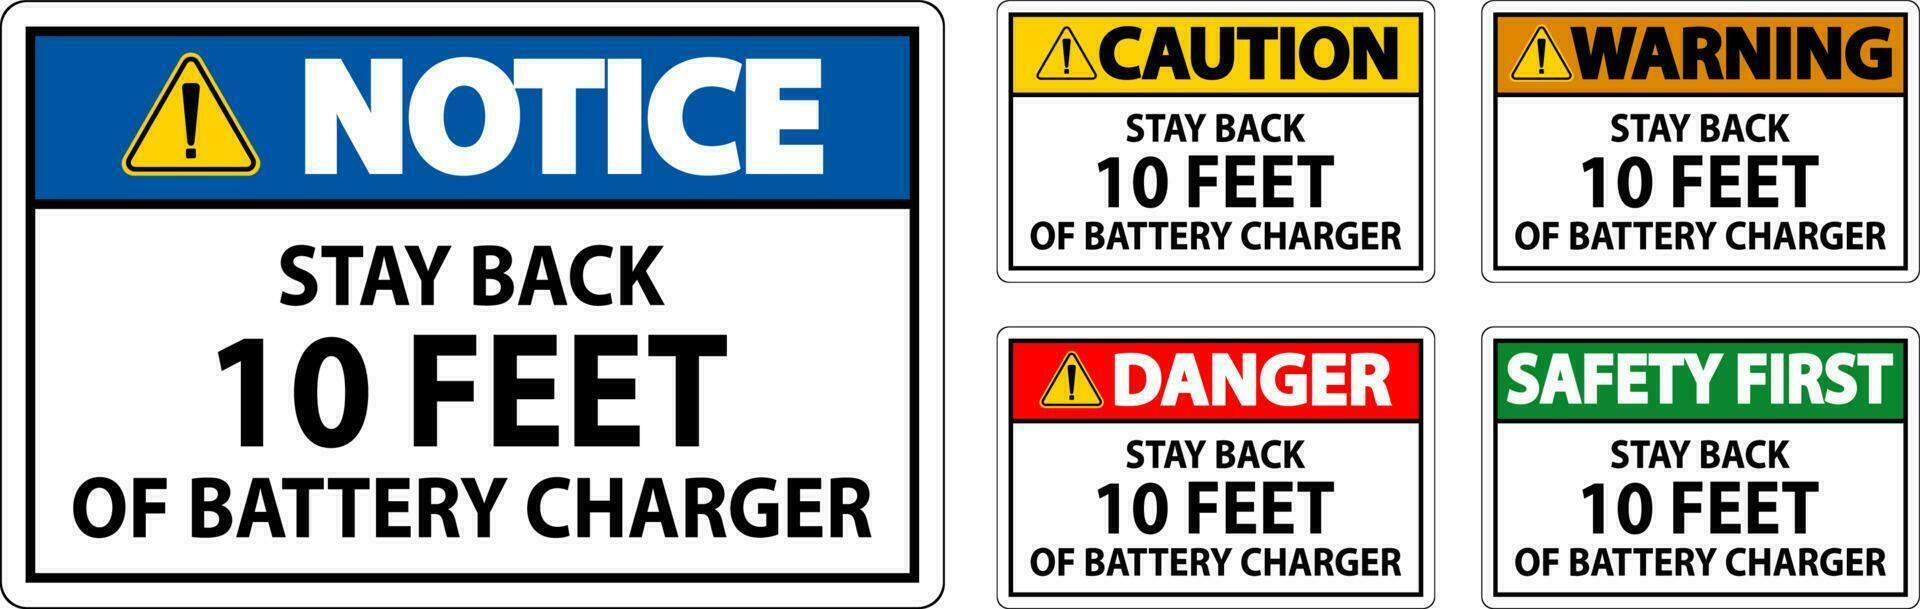 Caution Sign Stay Back 10 Feet Of Battery Charger vector